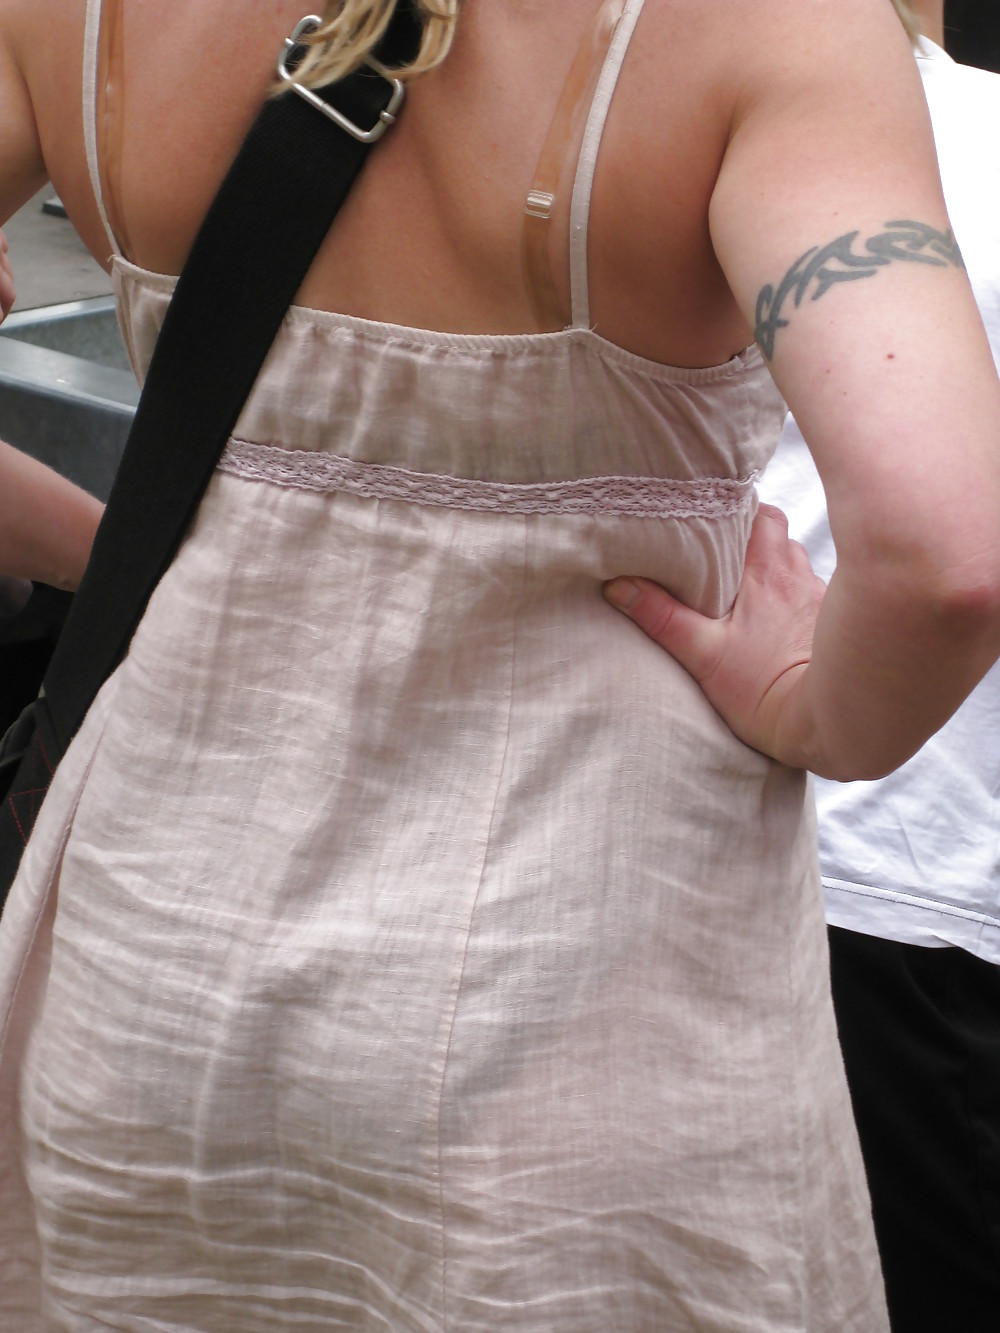 My own candid pics voyeur thong and panties public #37124257